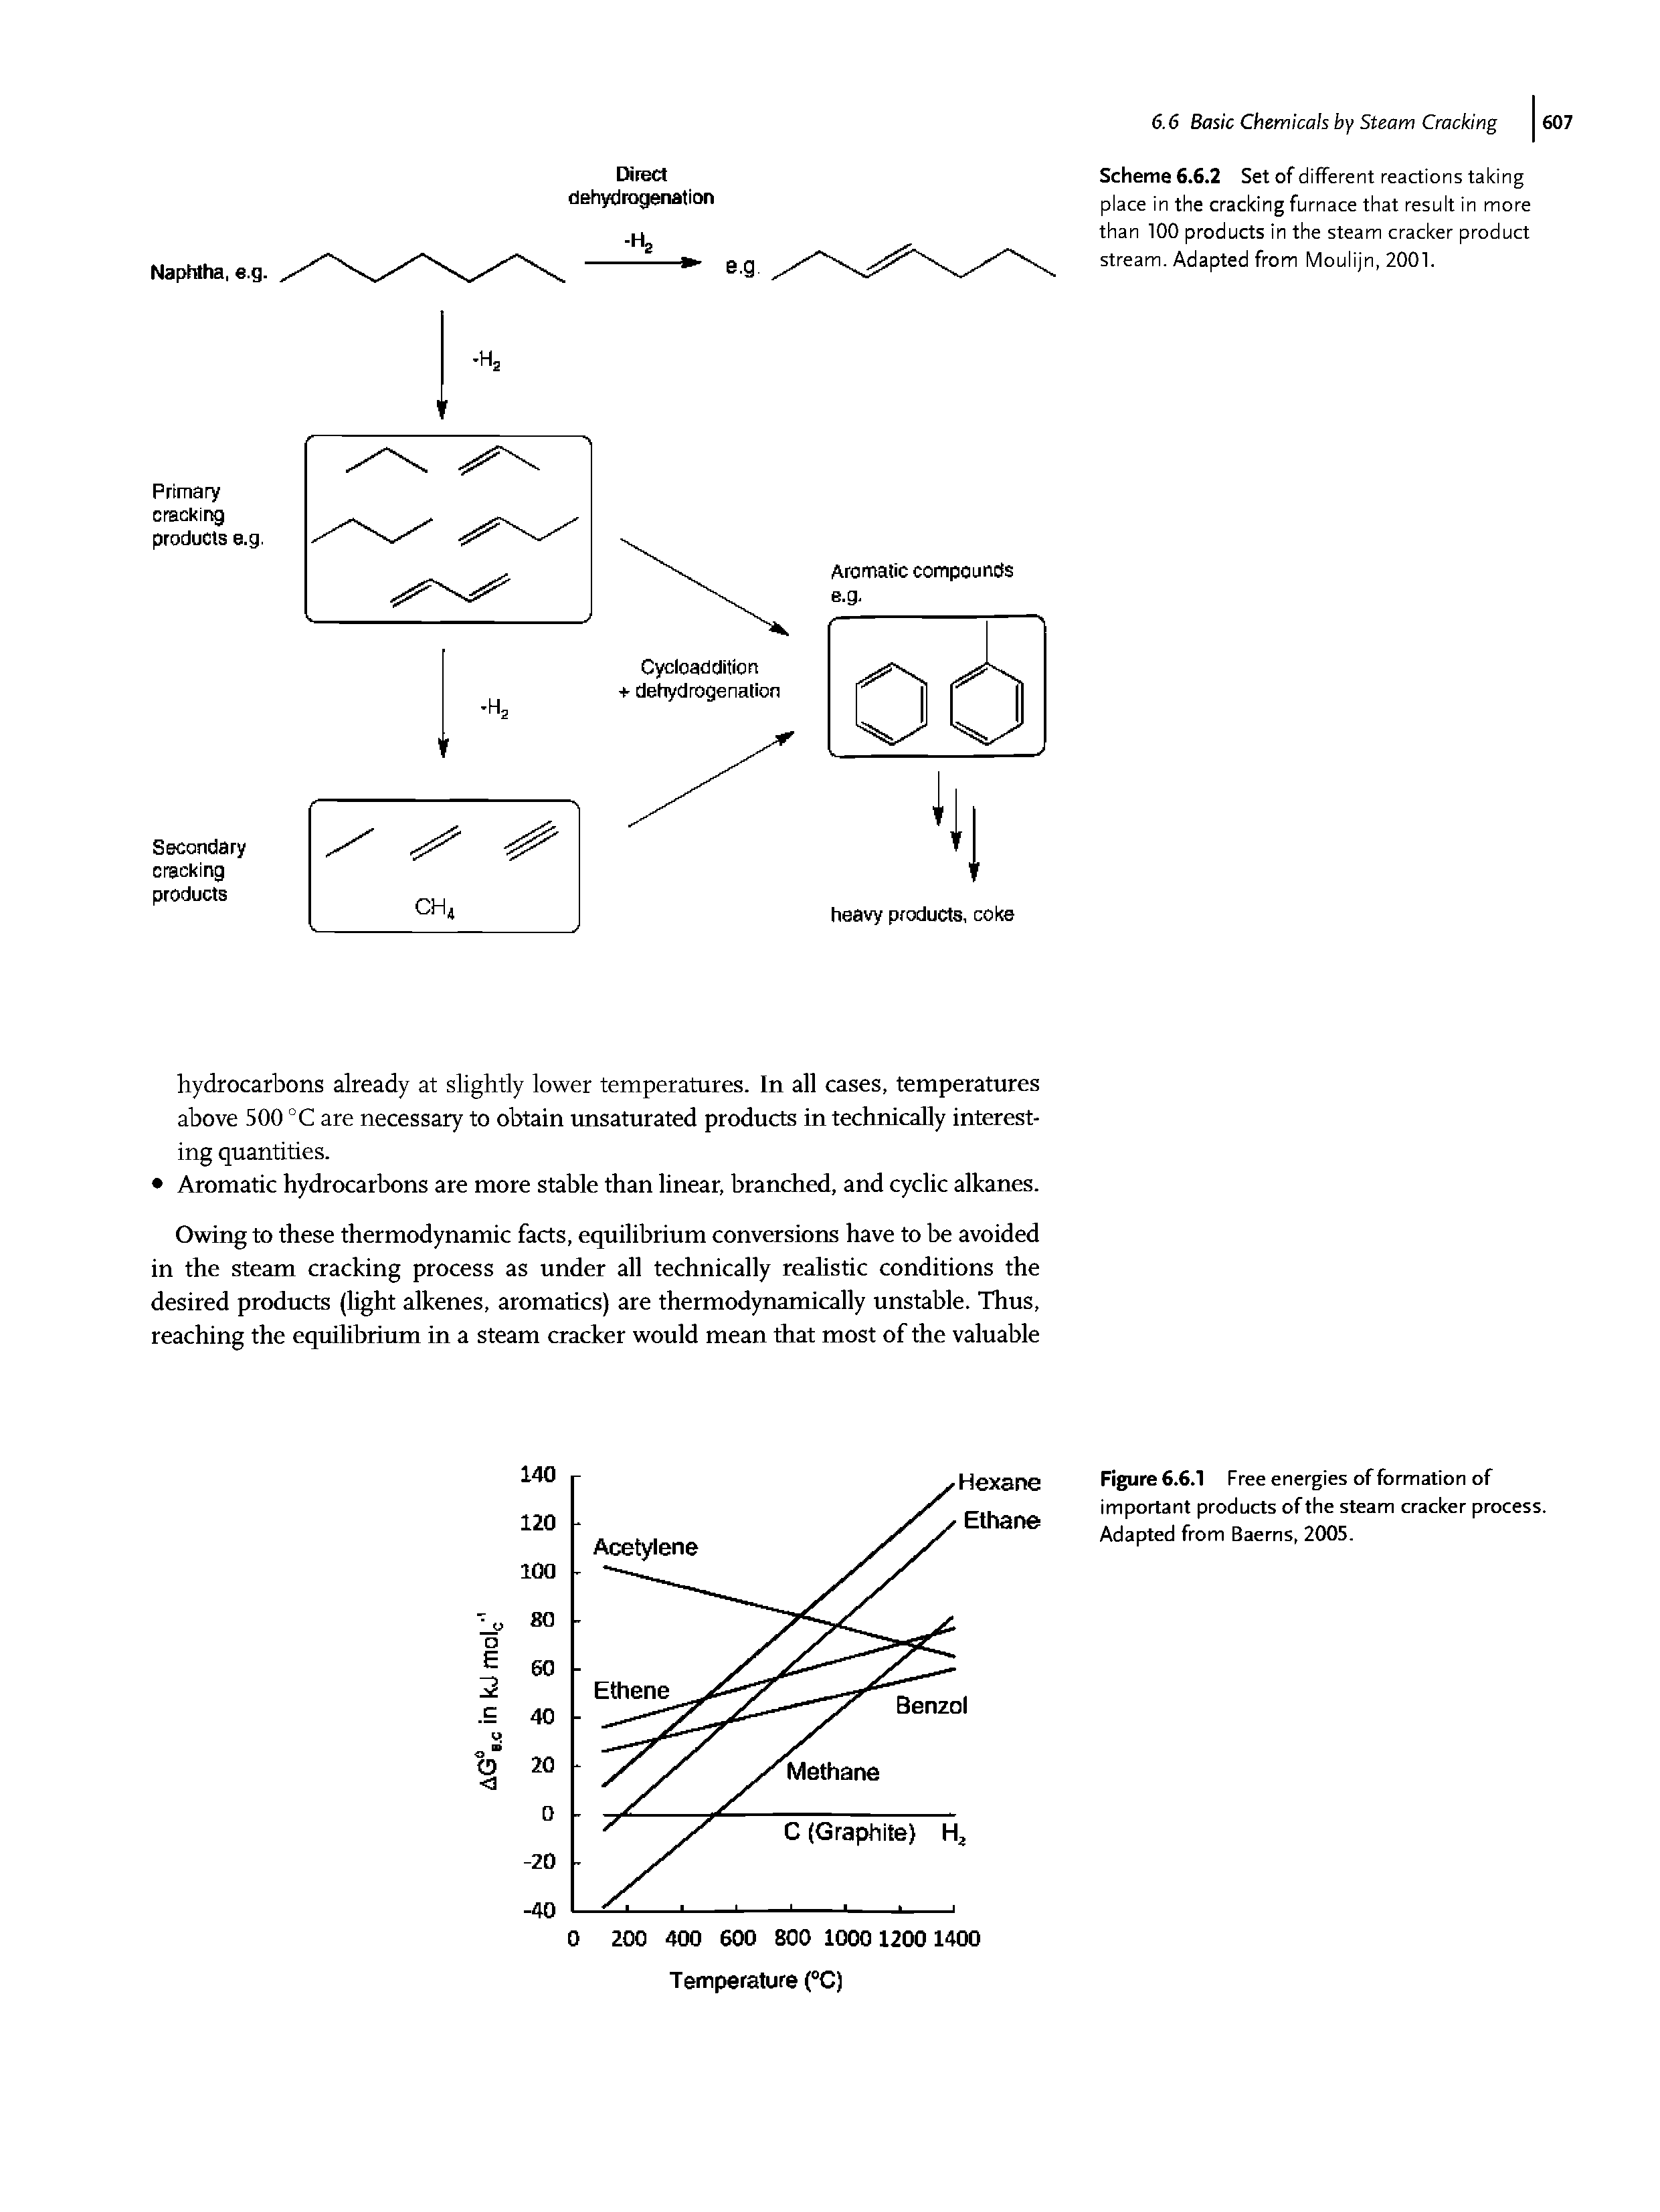 Scheme 6.6.2 Set of different reactions taking place in the cracking furnace that result in more than 100 products in the steam cracker product stream. Adapted from Moulijn, 2001.